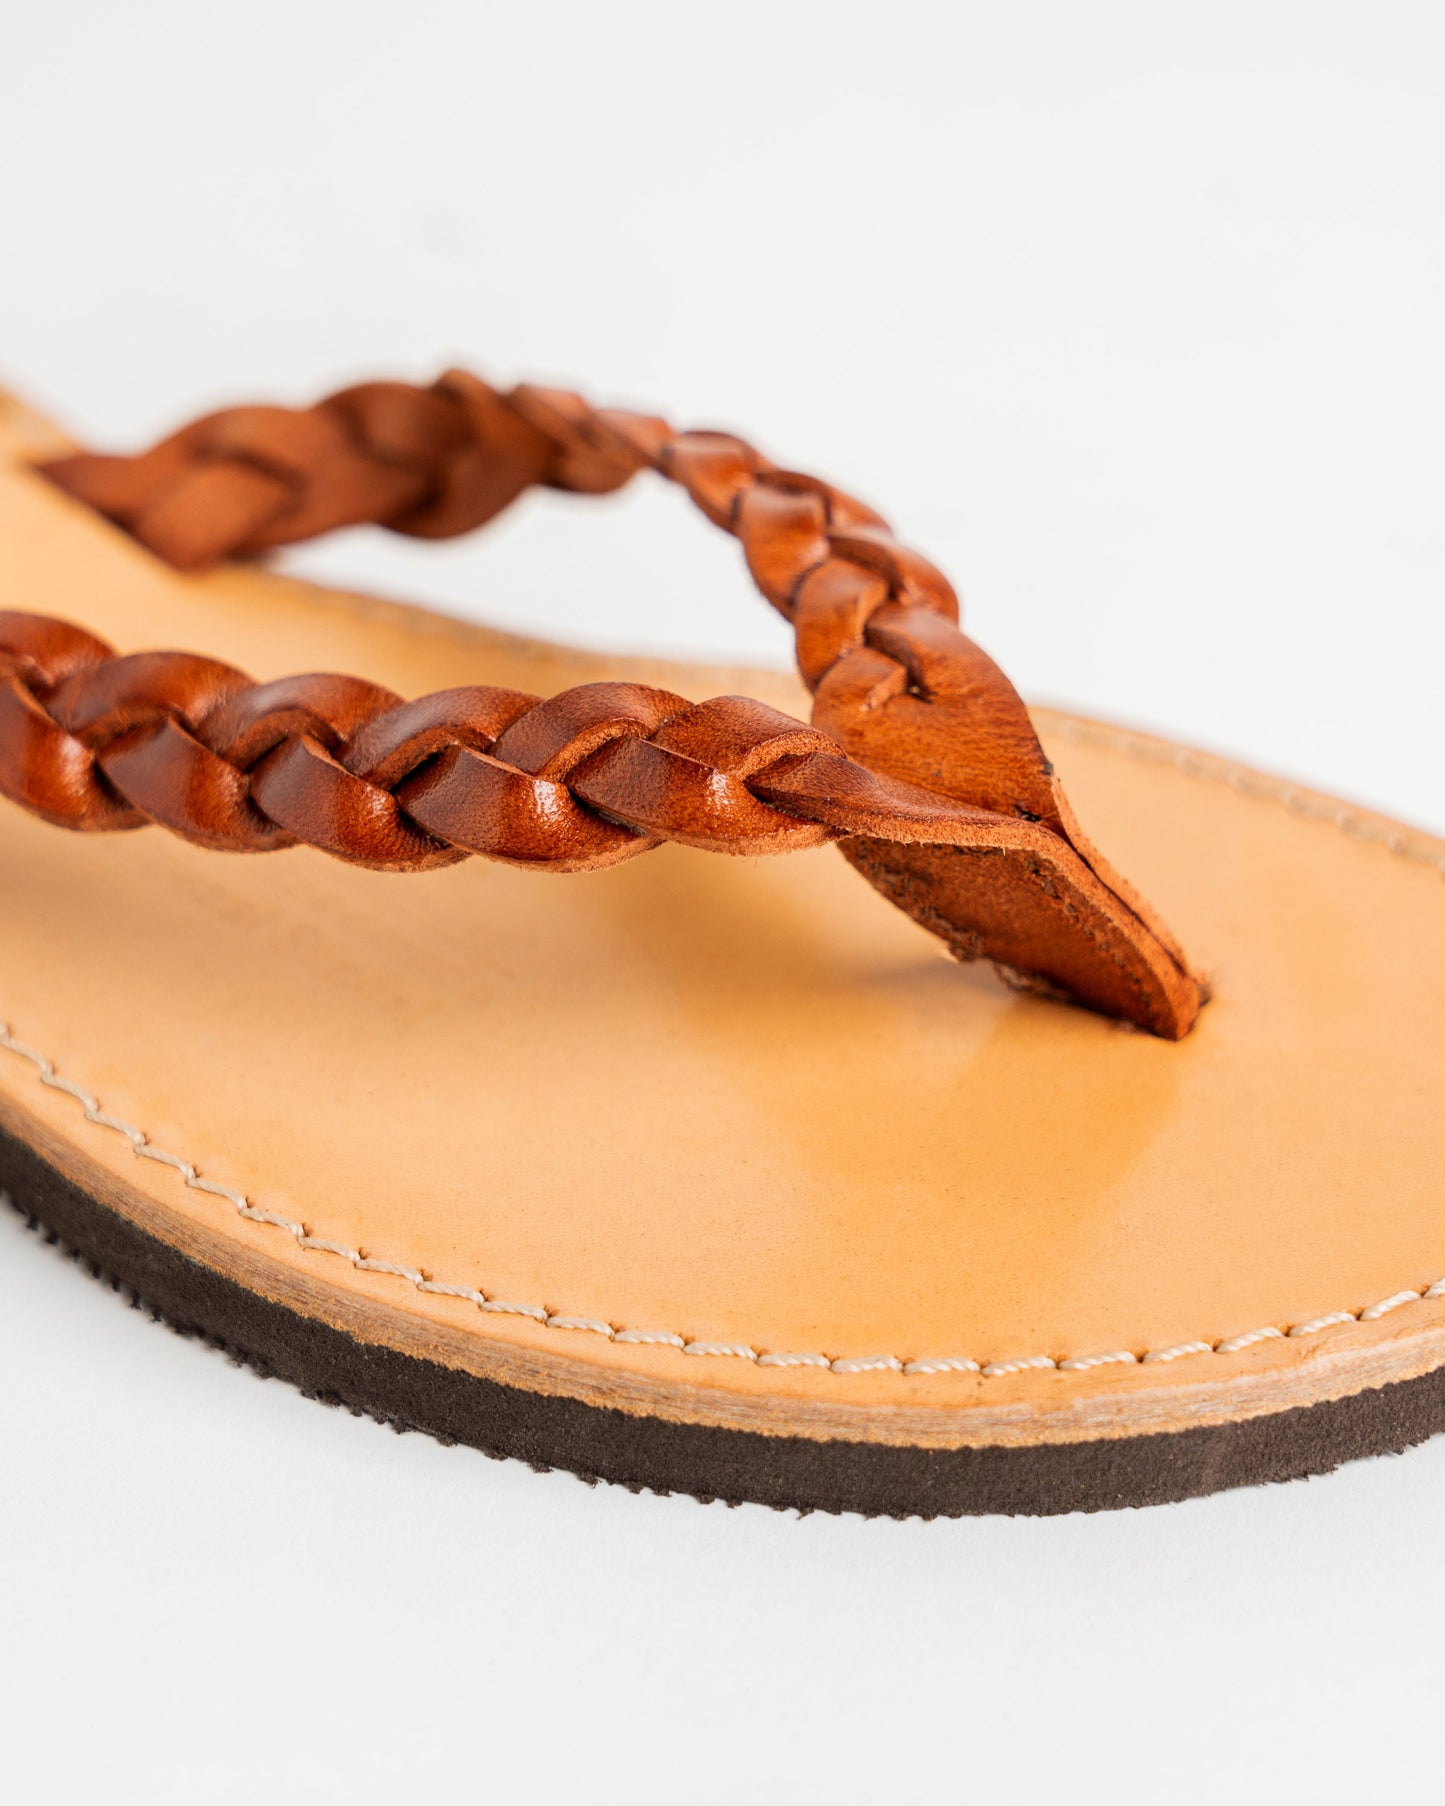 Brown leather flip flop sandals, Womens leather braided thong sandals, Handmade leather flat sandals